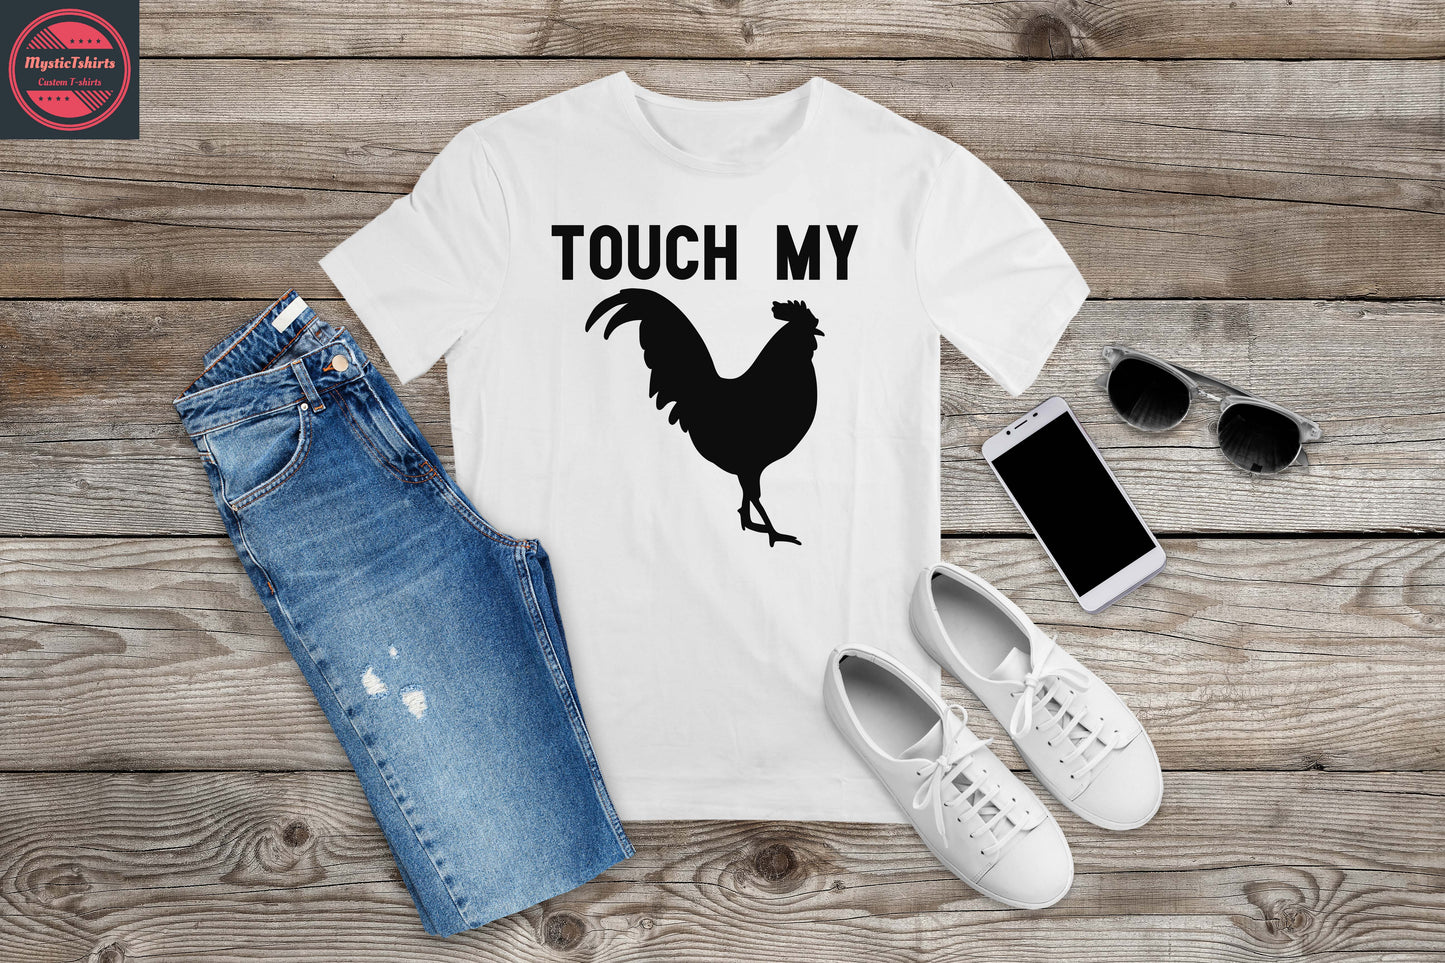 465. TOUCH MY, Personalized T-Shirt, Custom Text, Make Your Own Shirt, Custom Tee